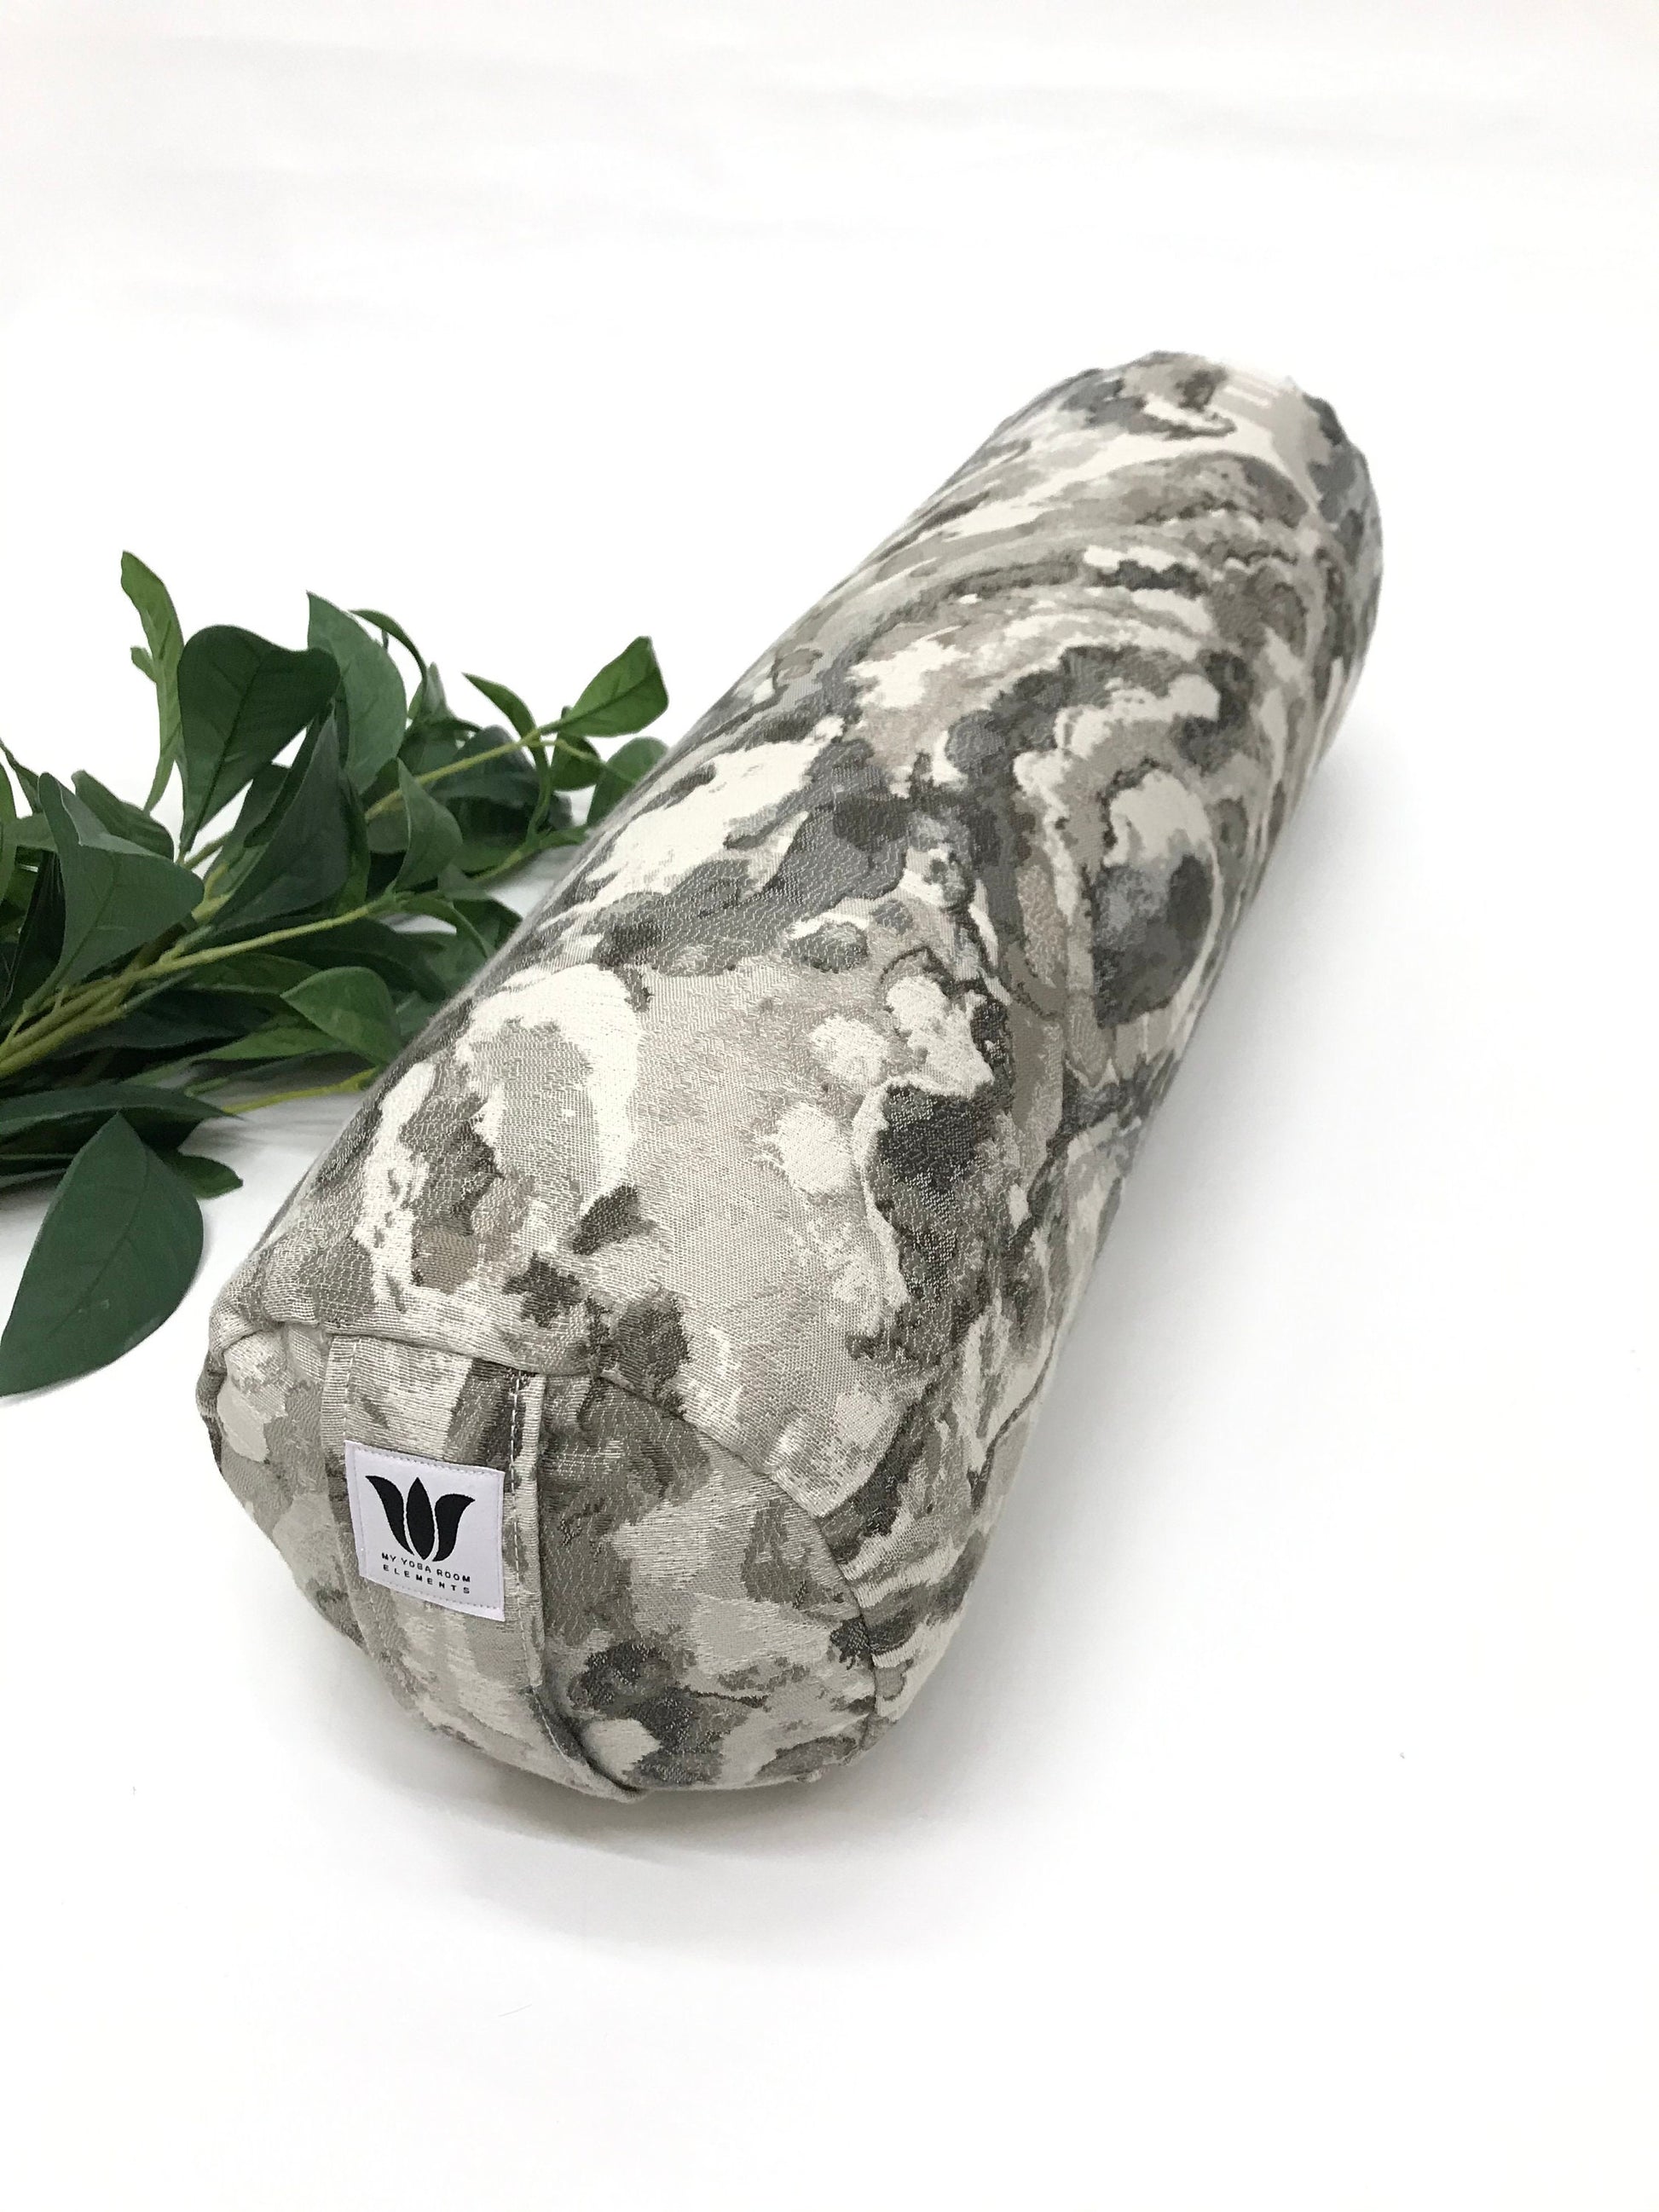 Round yoga bolster in durable cotton, grey and white marble print fabric. Allergy conscious fill with removeable cover. Made in Canada by My Yoga Room Elements